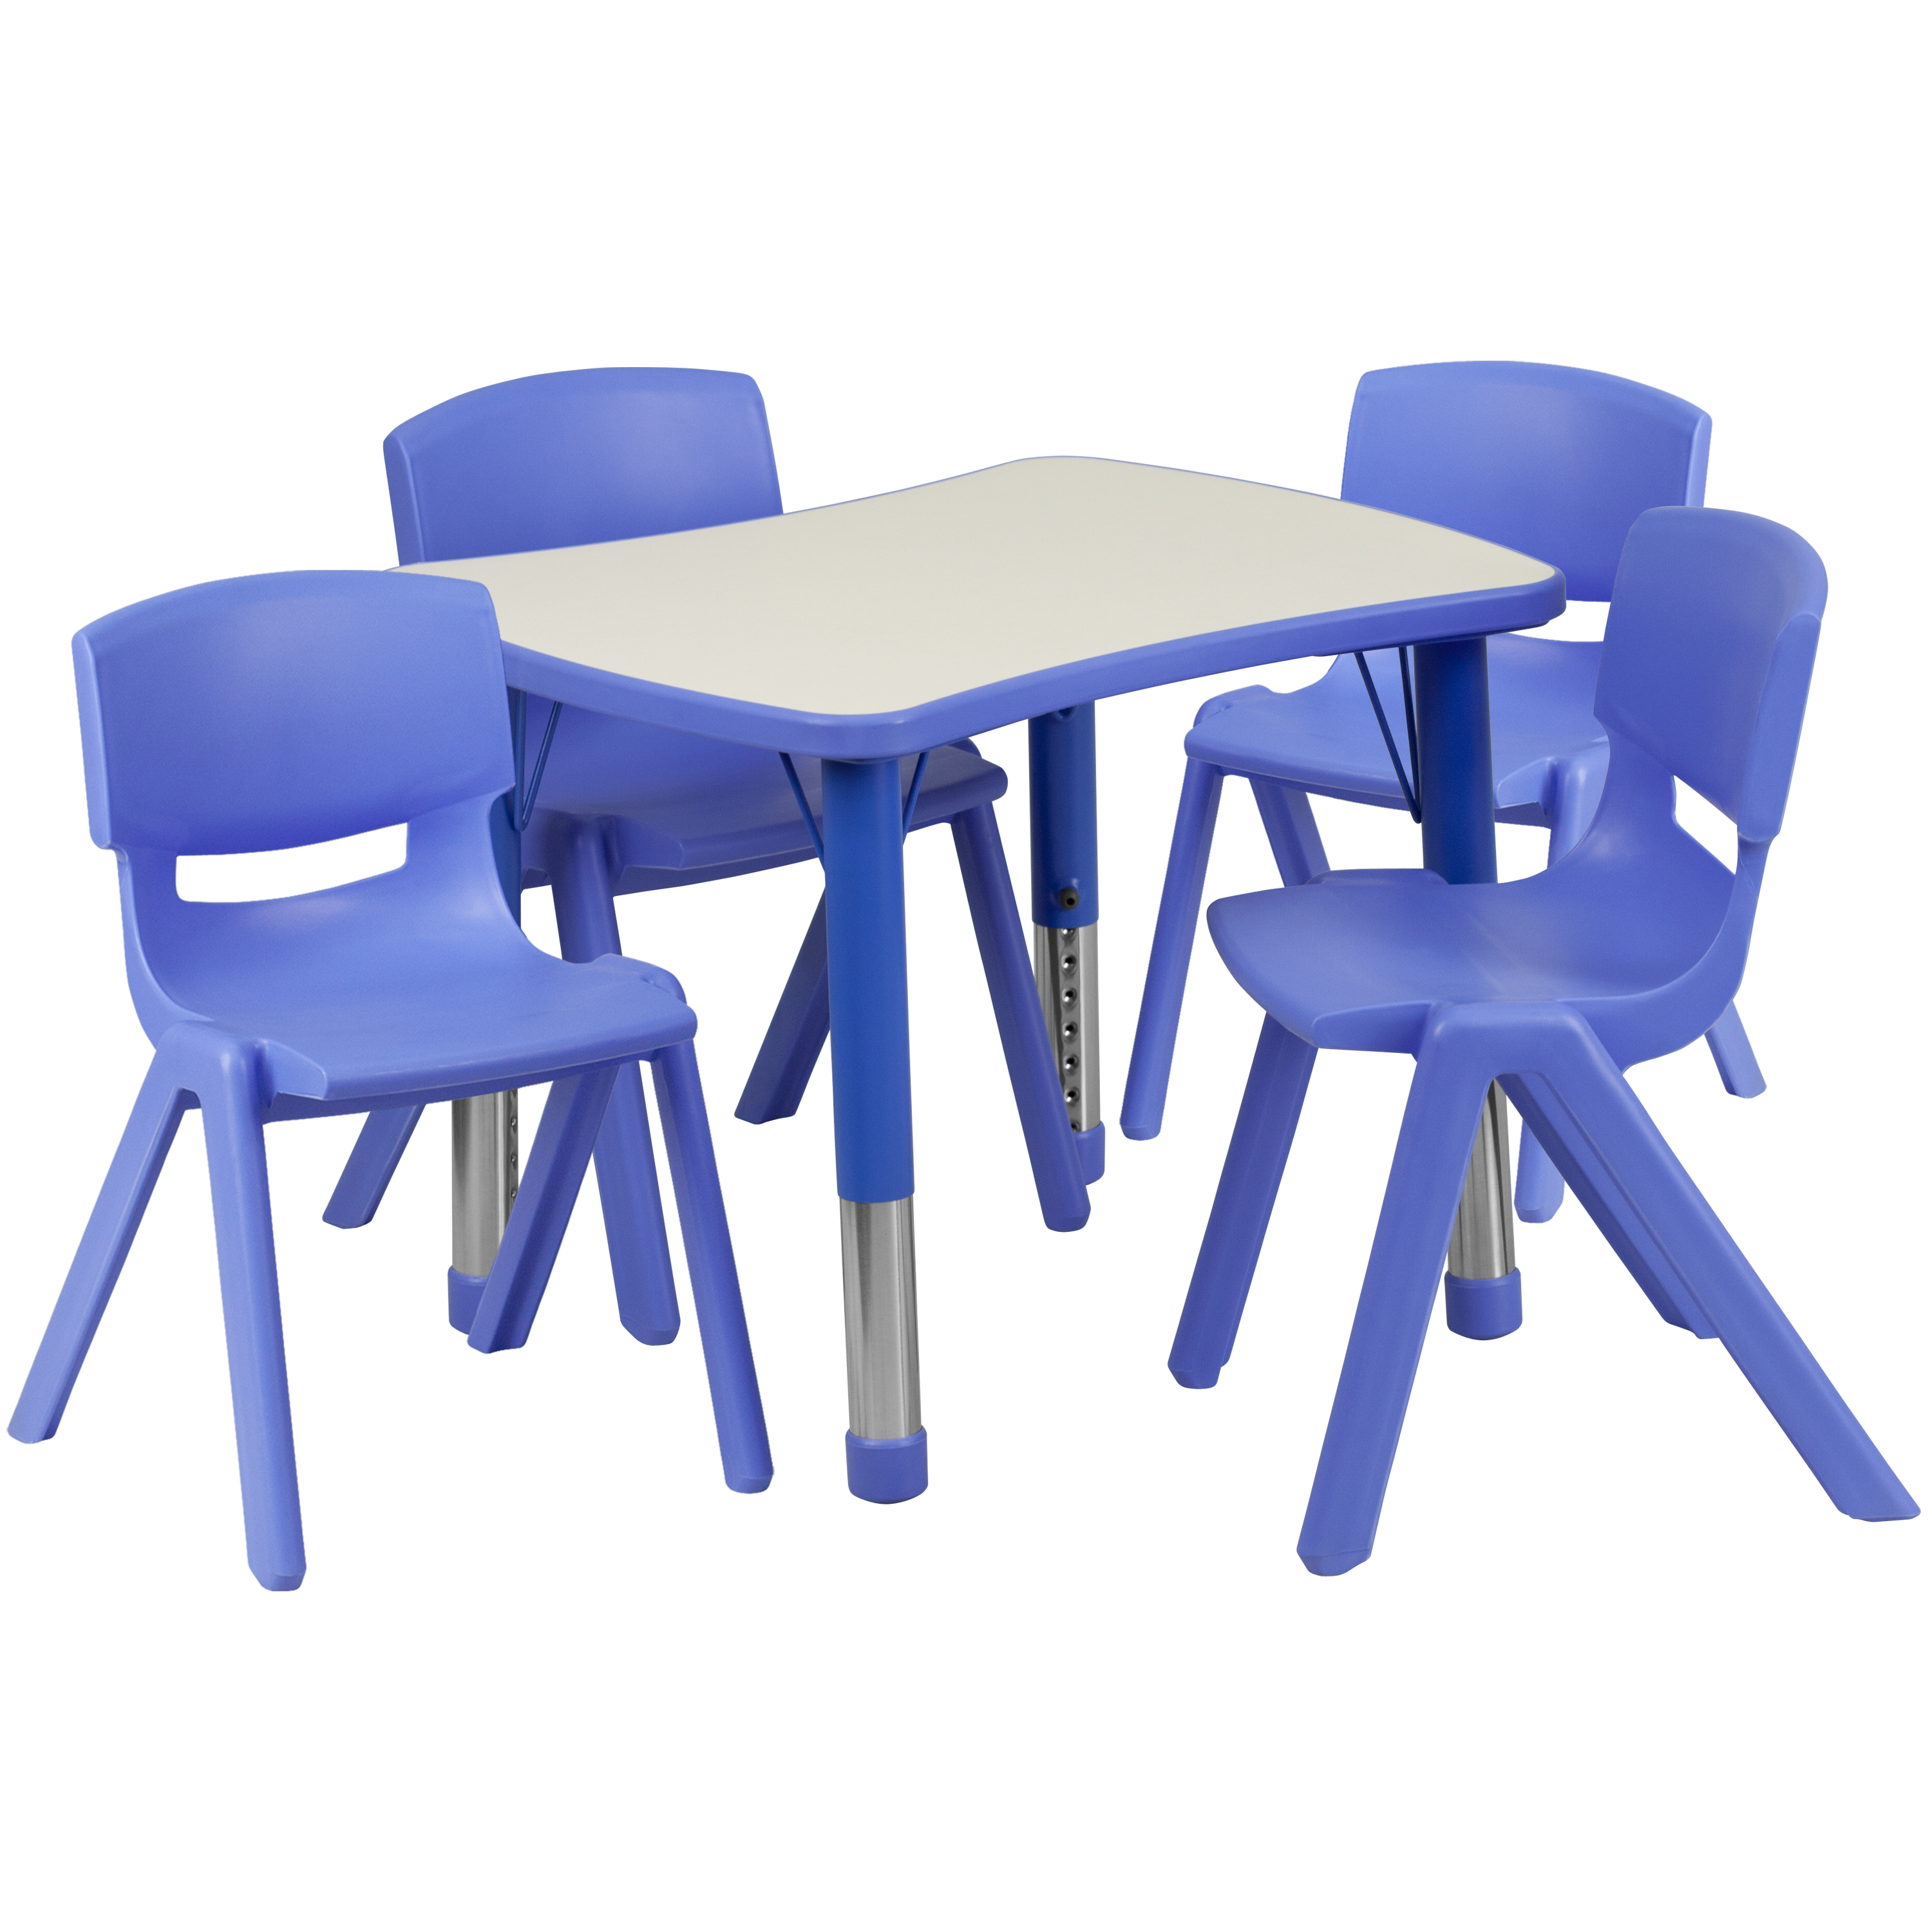 Flash Furniture 21.875''W x 26.625''L Rectangular Blue Plastic Height Adjustable Activity Table Set with 4 Chairs - image 1 of 2